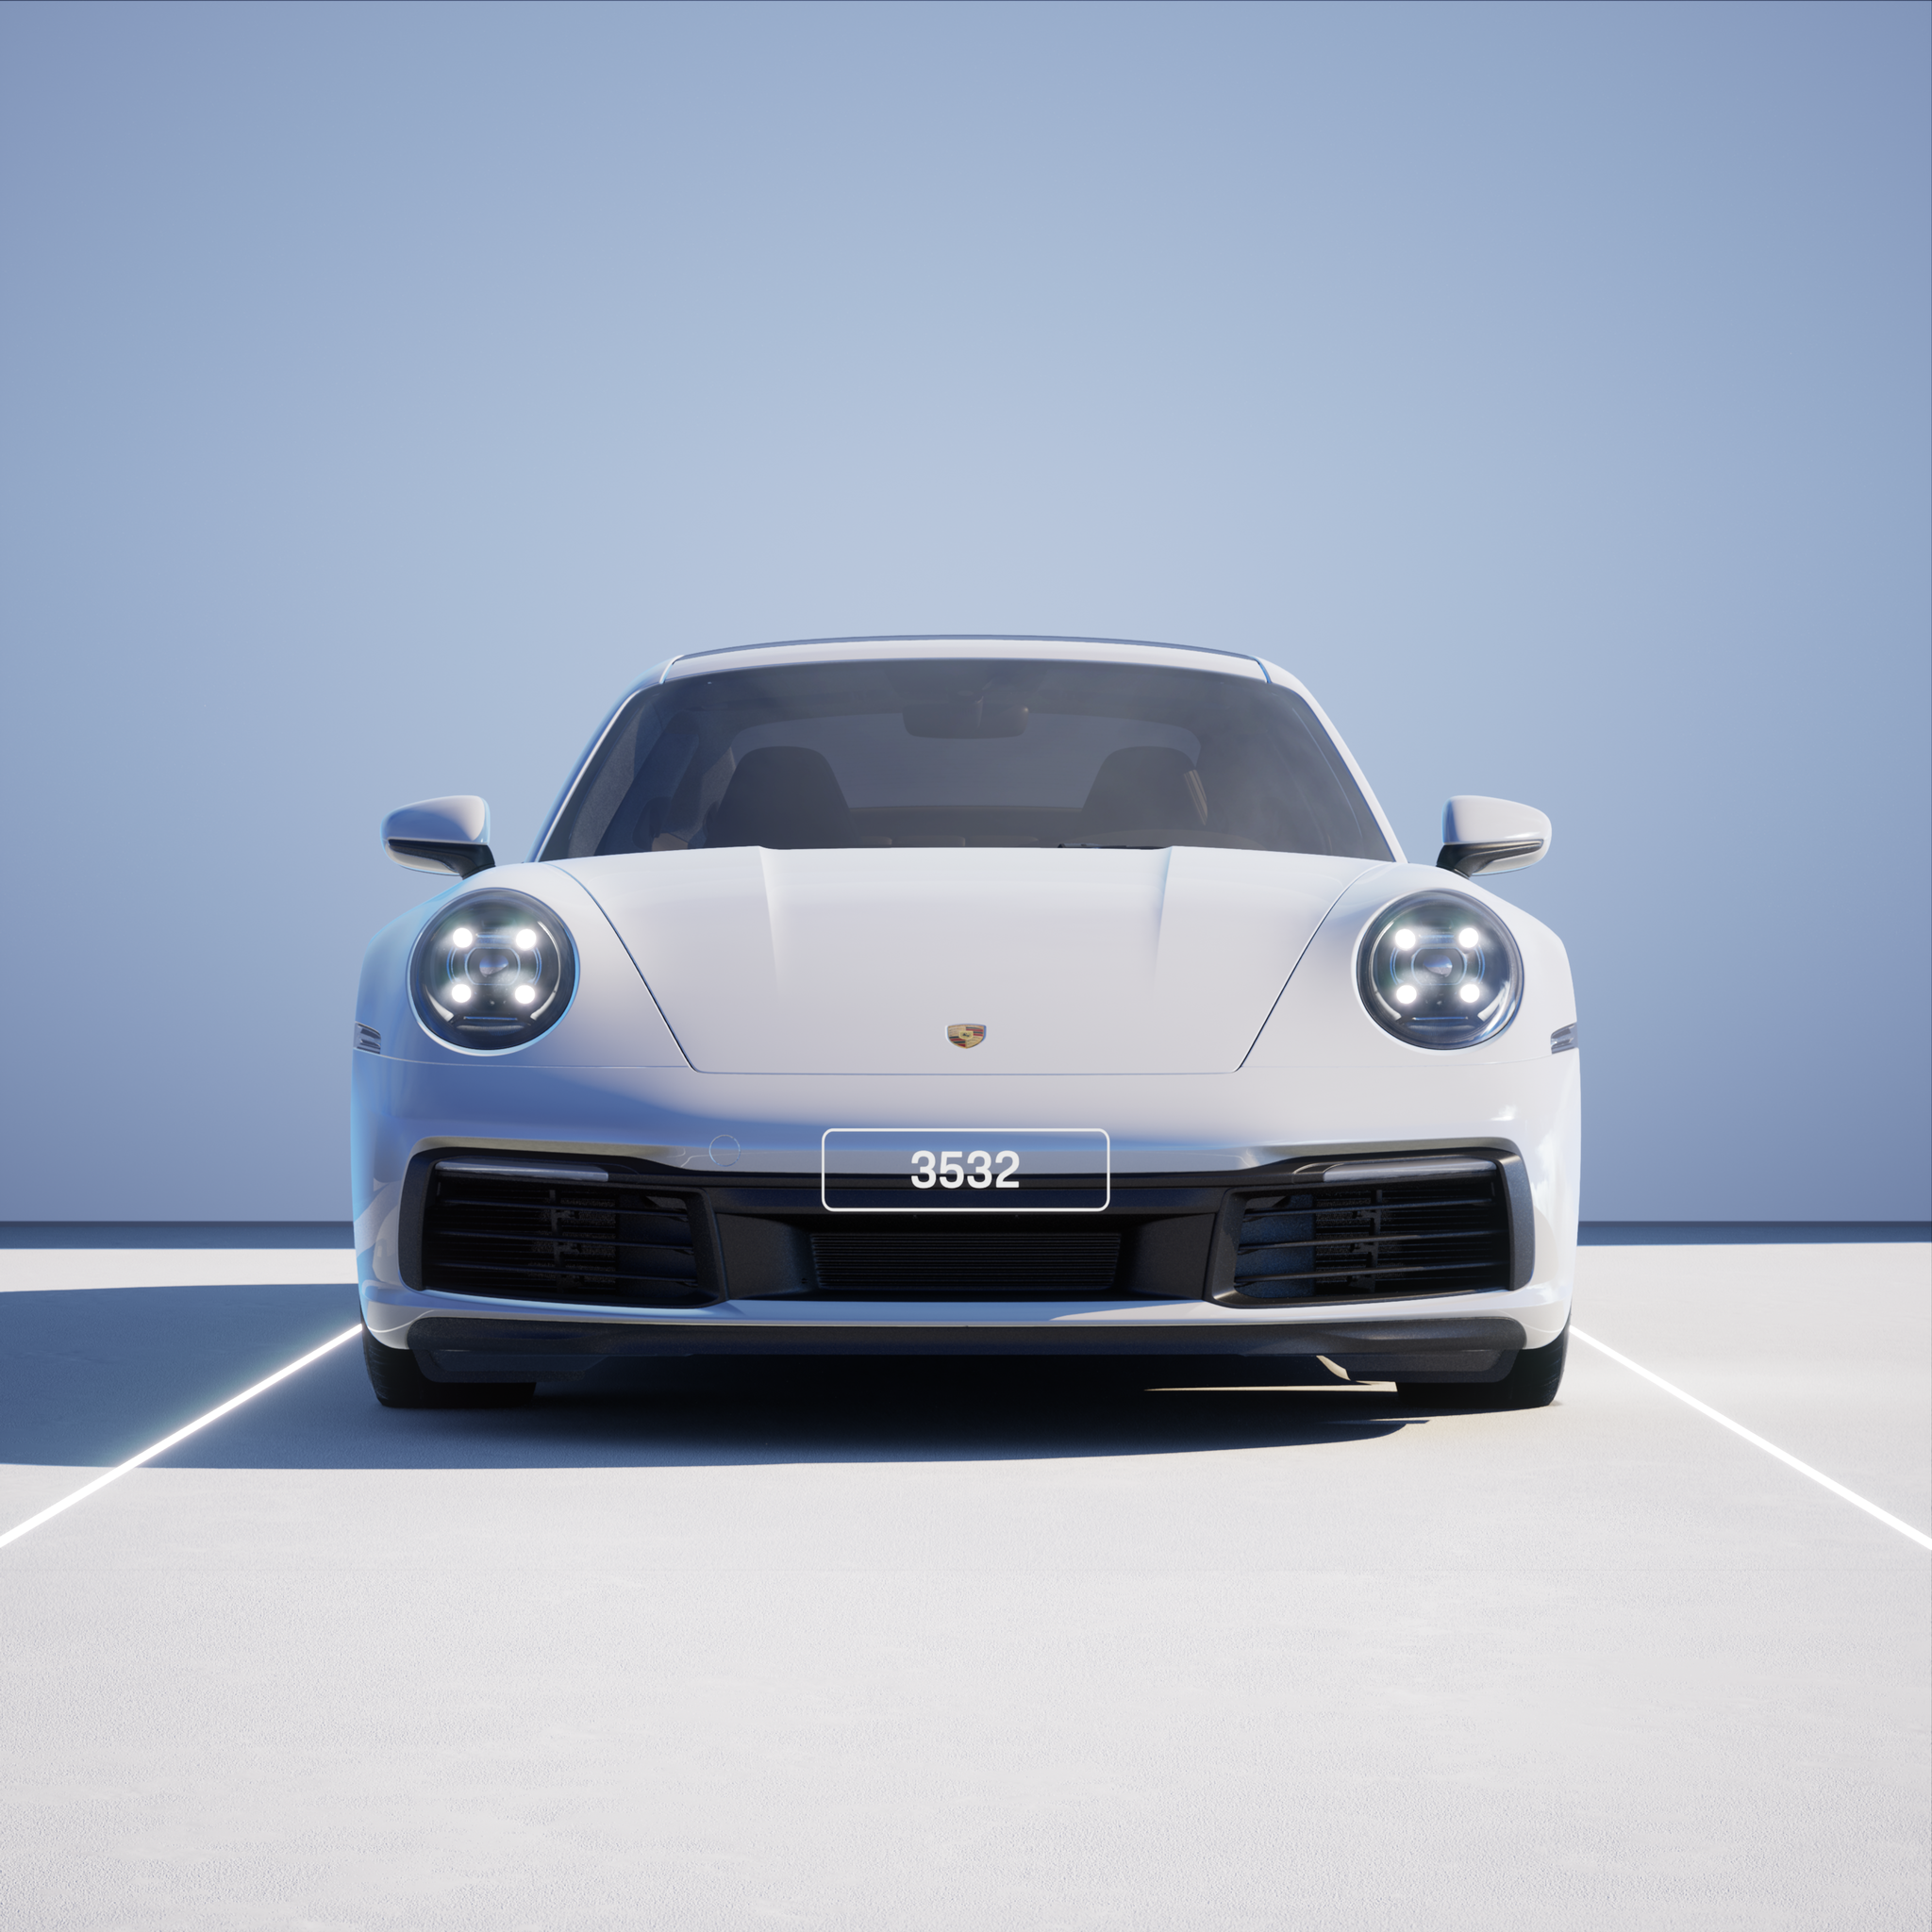 The PORSCHΞ 911 3532 image in phase